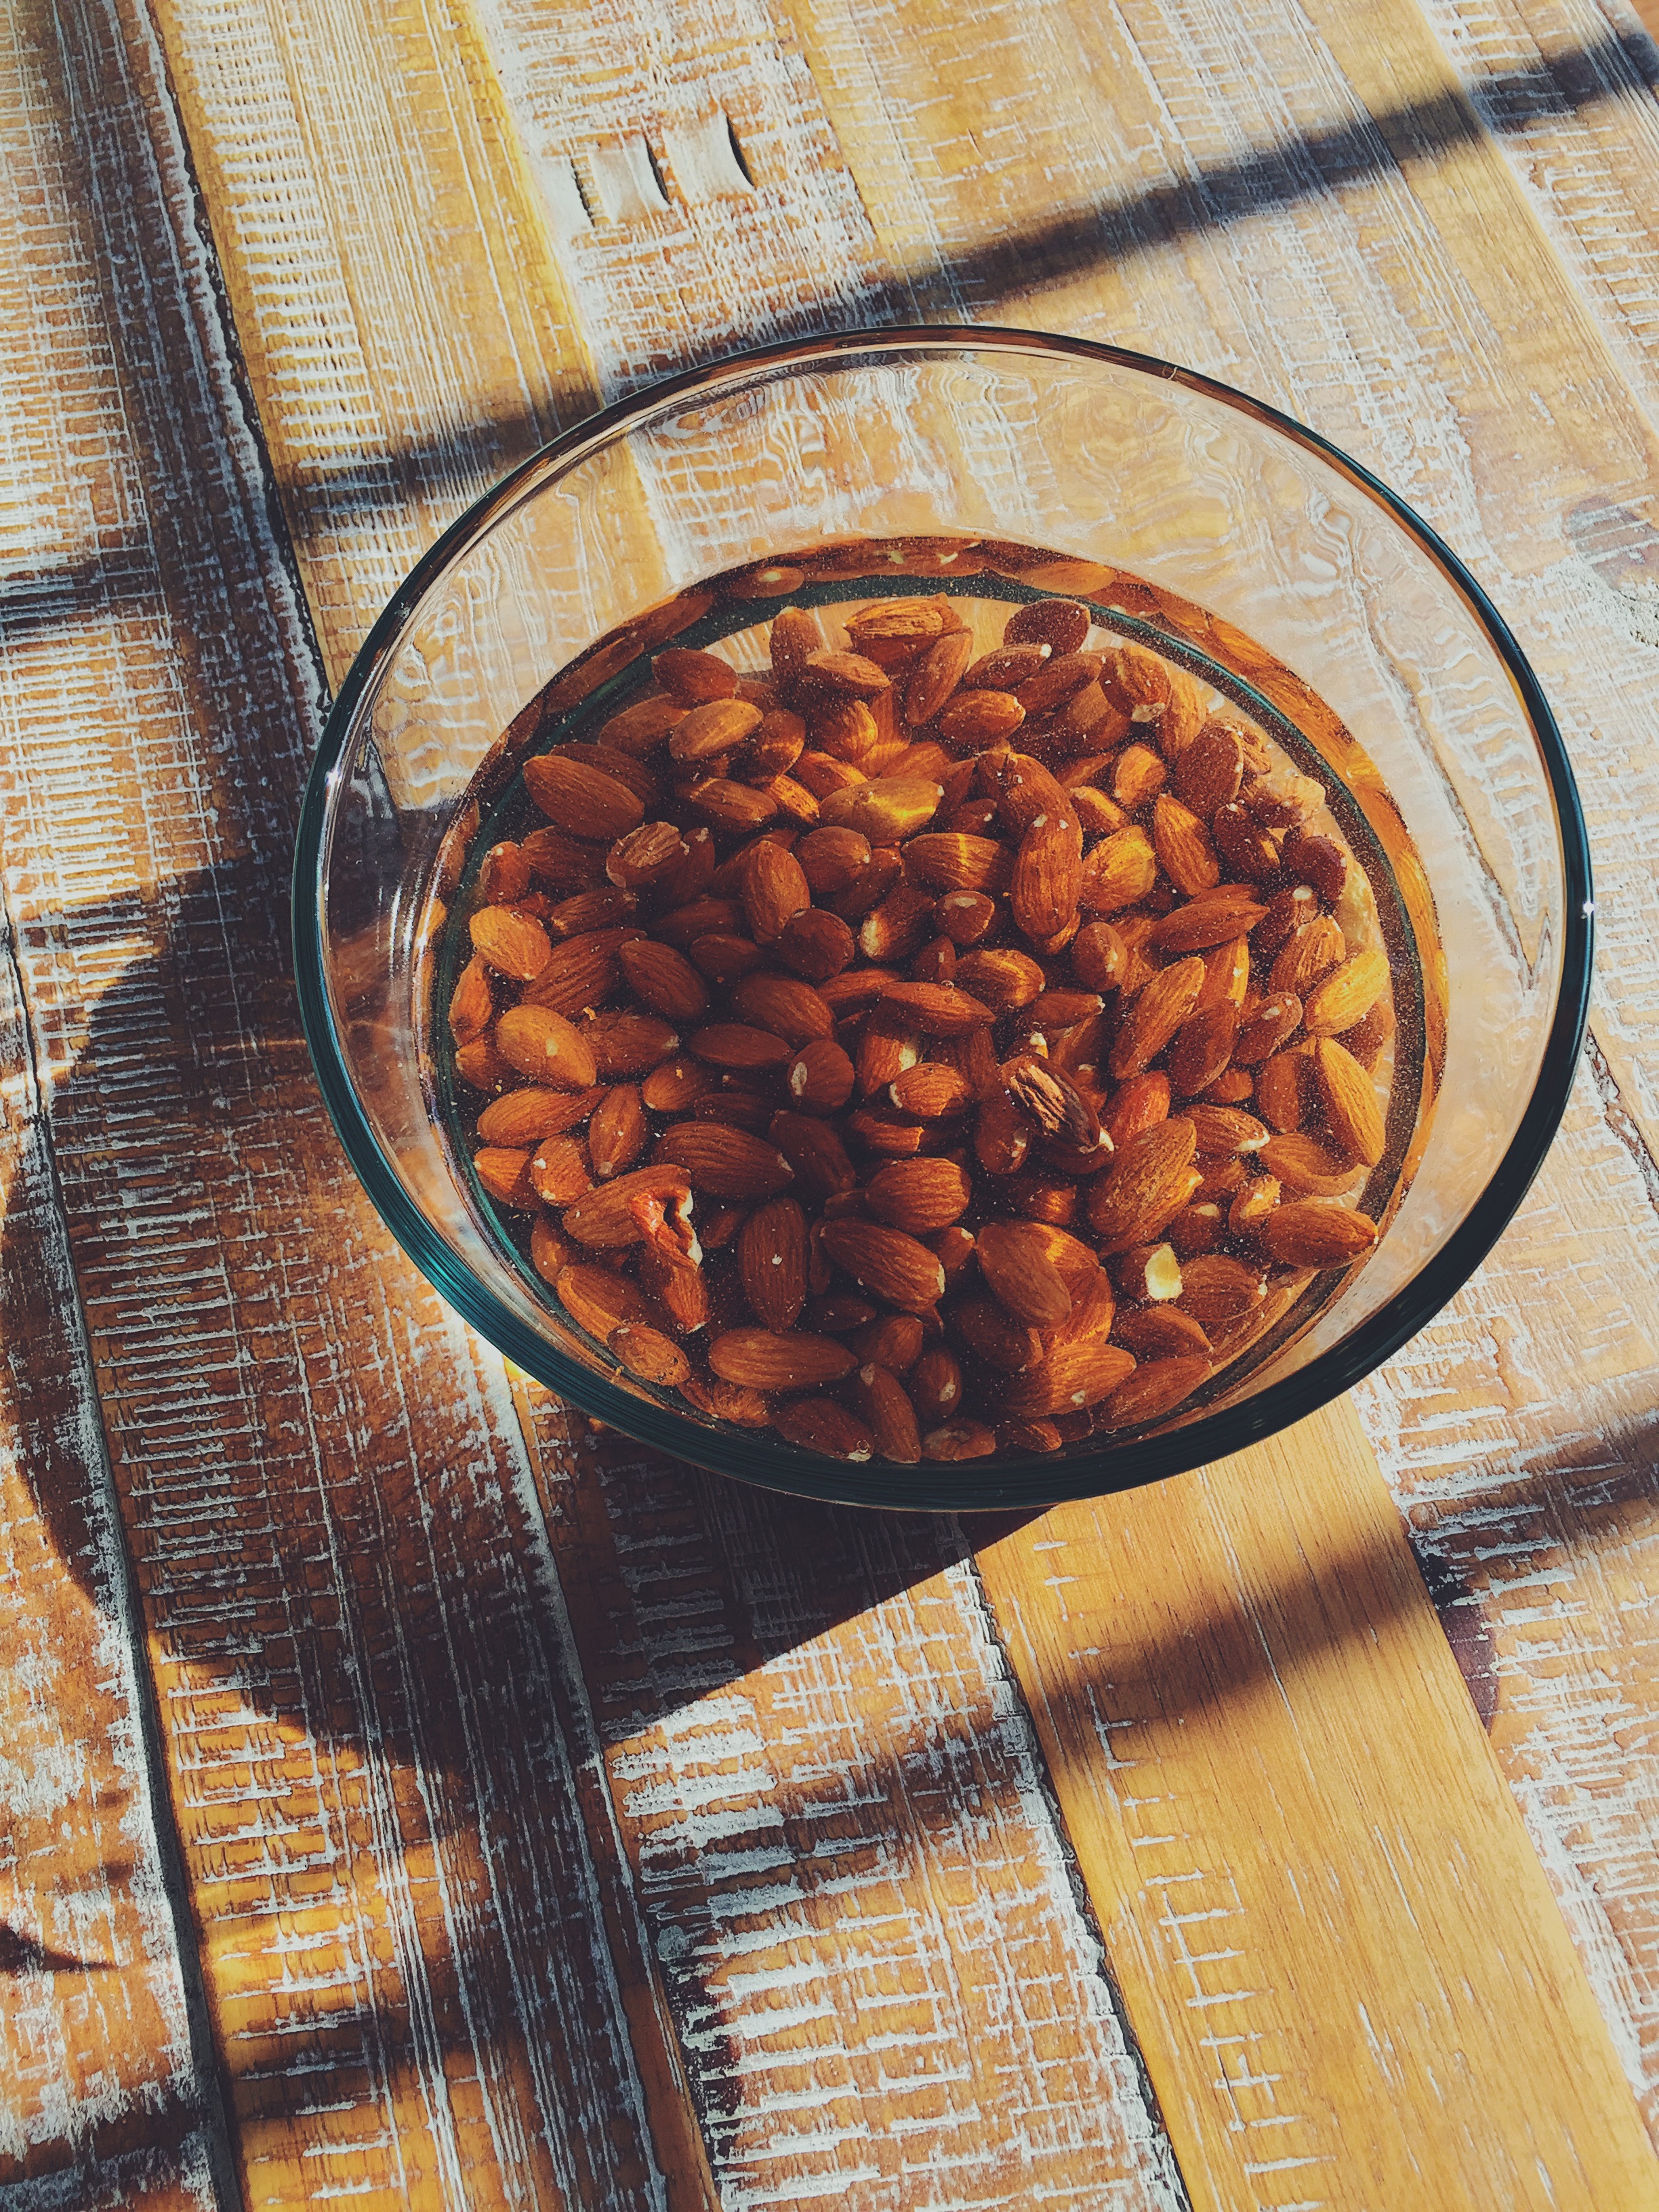 Soak almonds at least eight hours